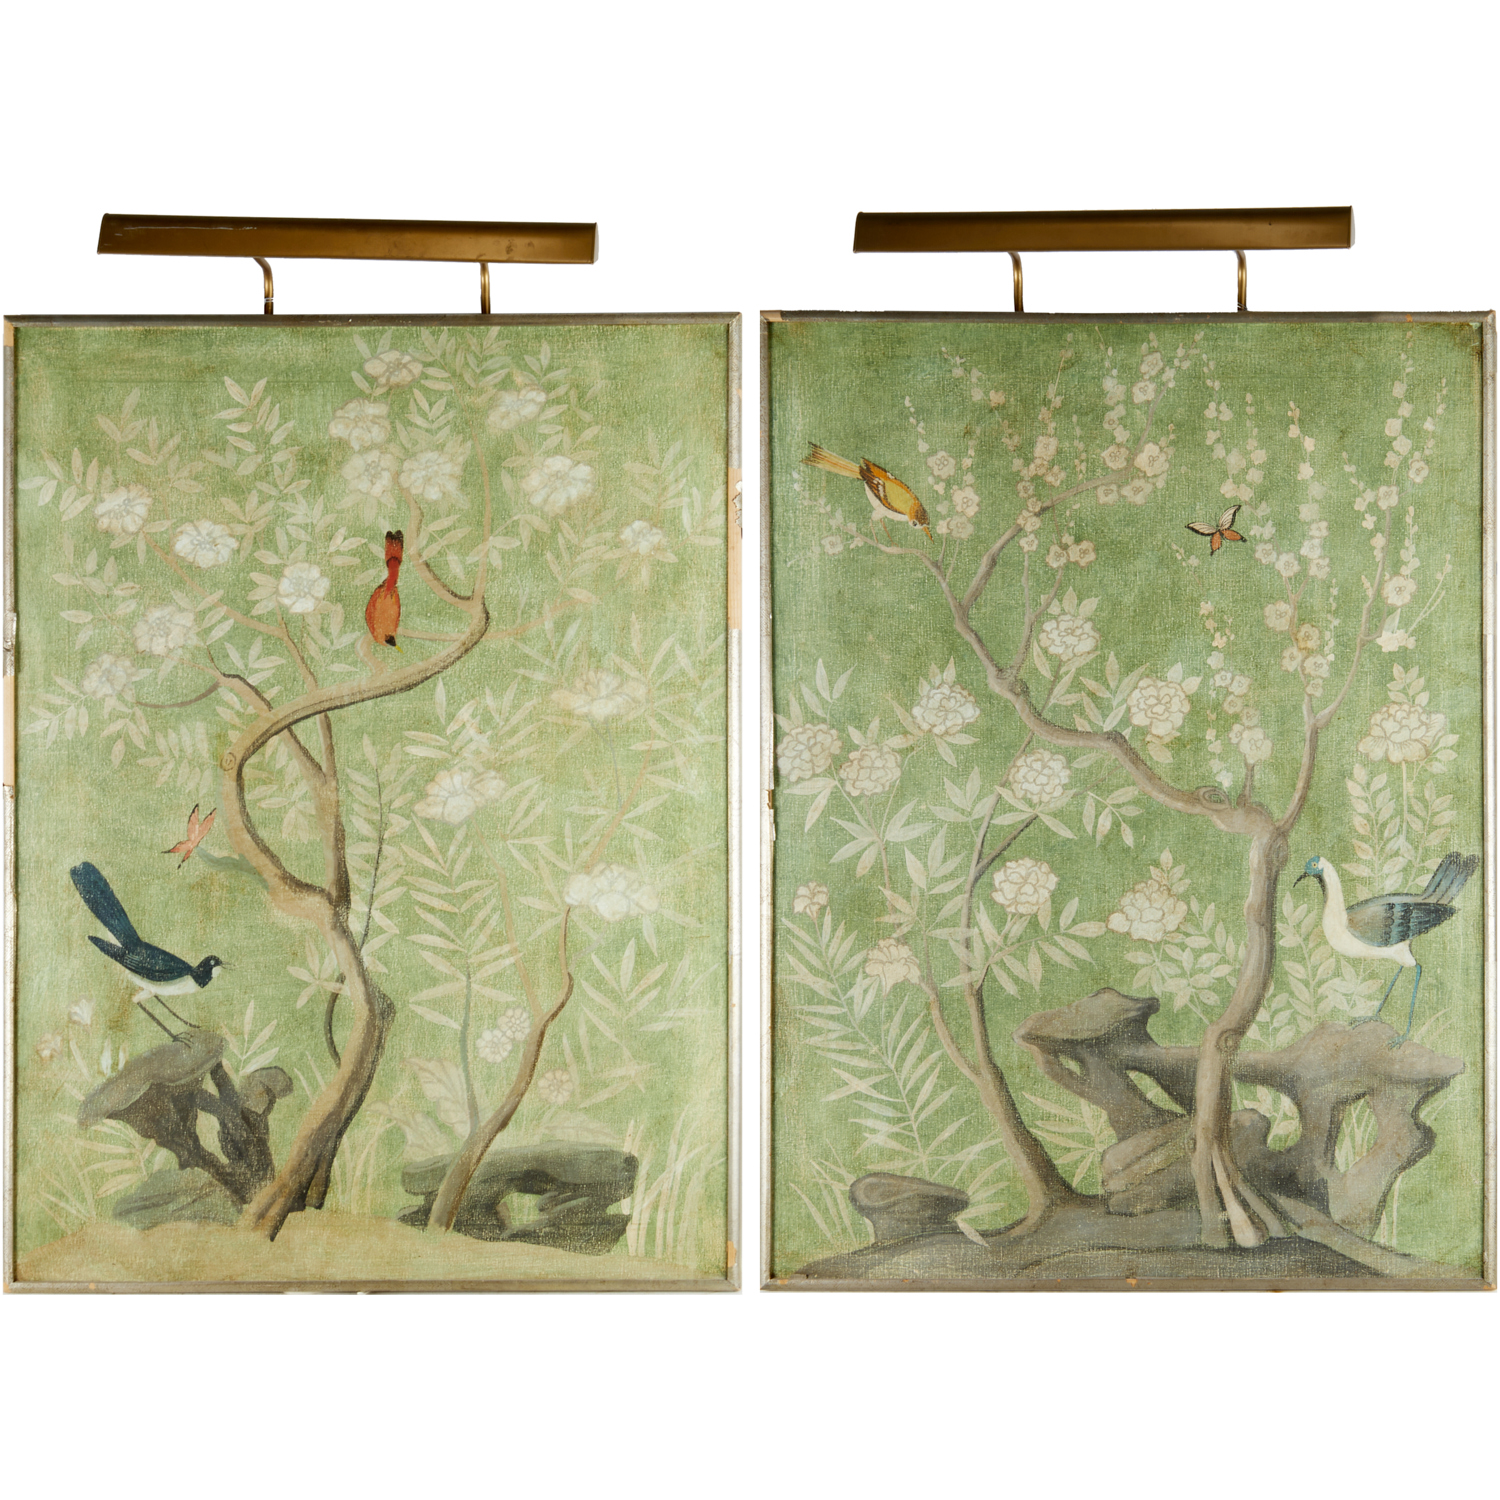 PAIR LARGE CHINOISERIE PAINTINGS 3609a7